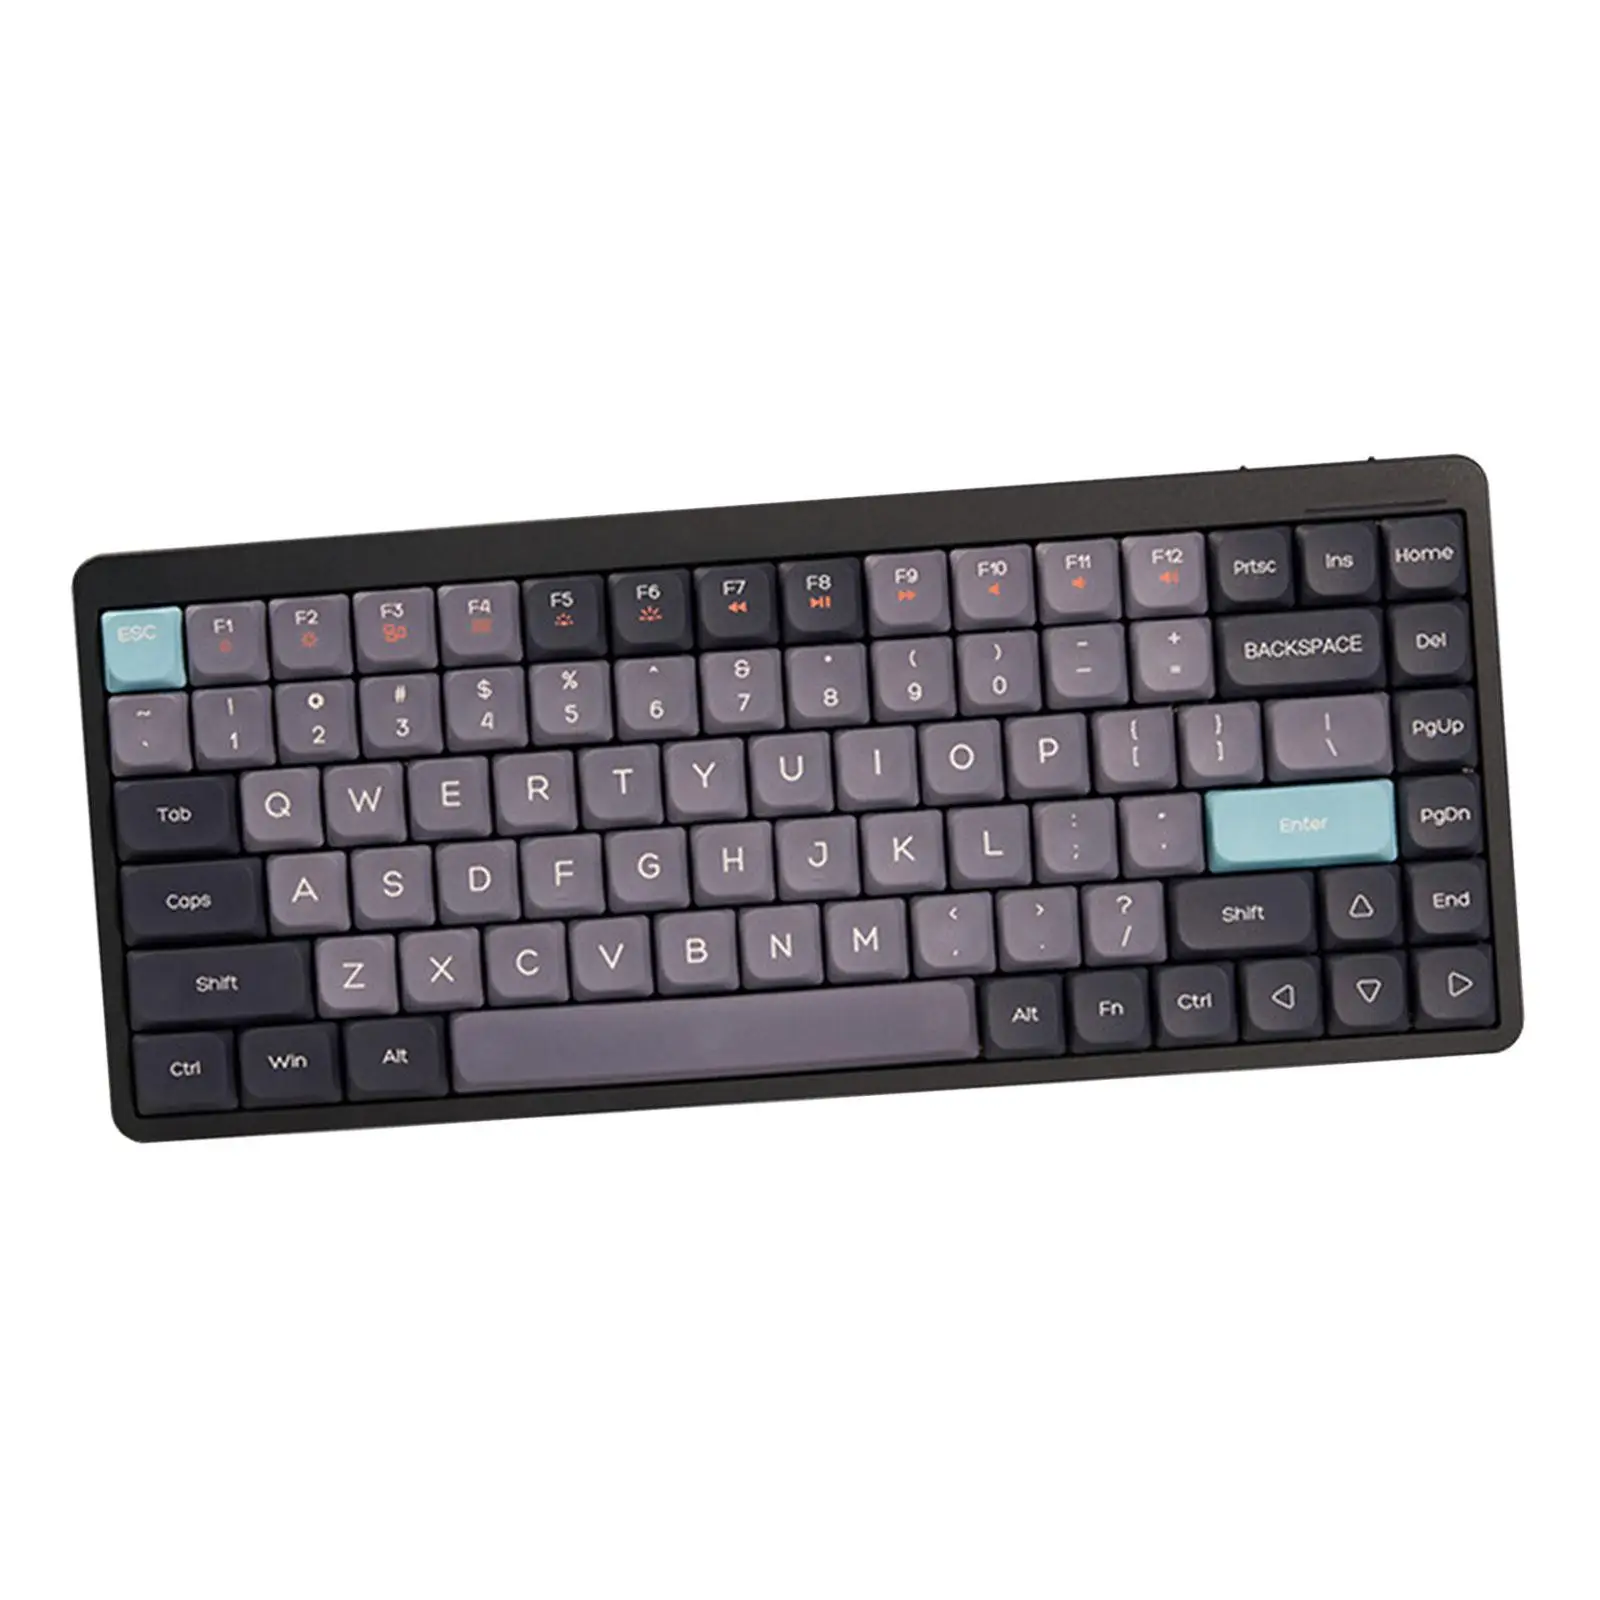 Mechanical Gaming Keyboard Brightness Adjustable Durable Wired USB RGB Backlight Ultra thin computer Keyboard Yk75 for Laptop PC